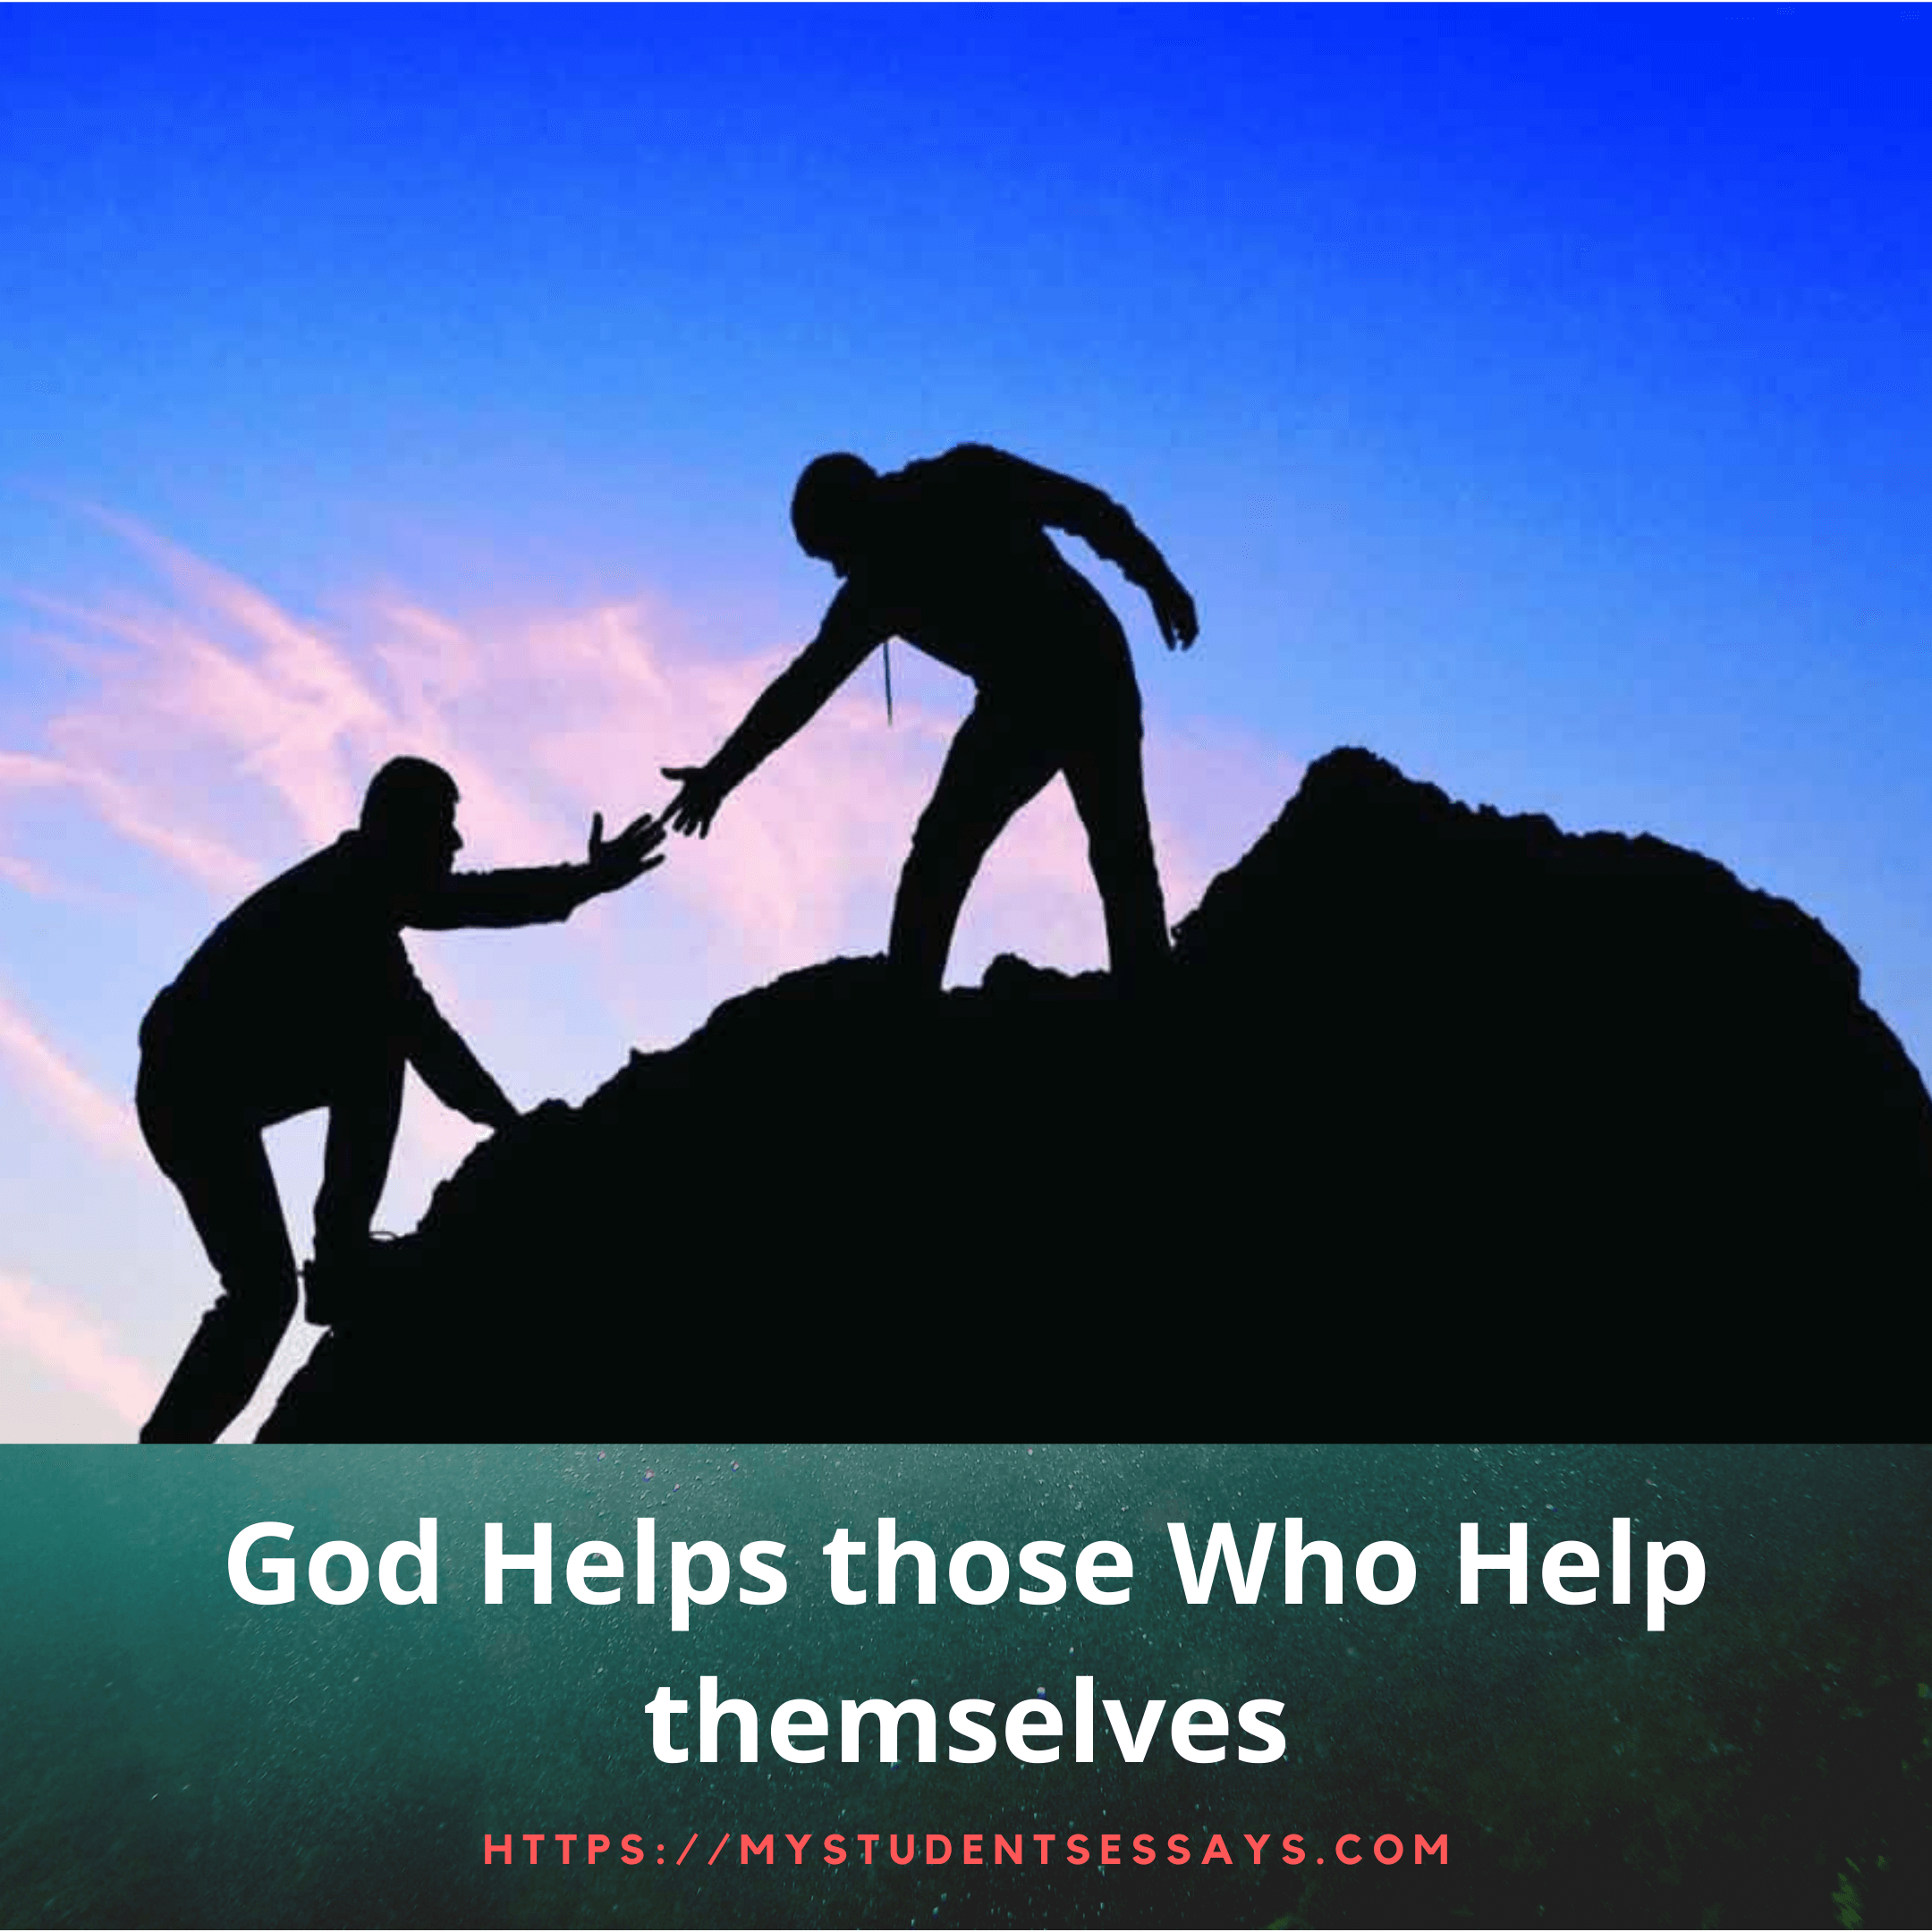 Essay on God helps those who help themselves